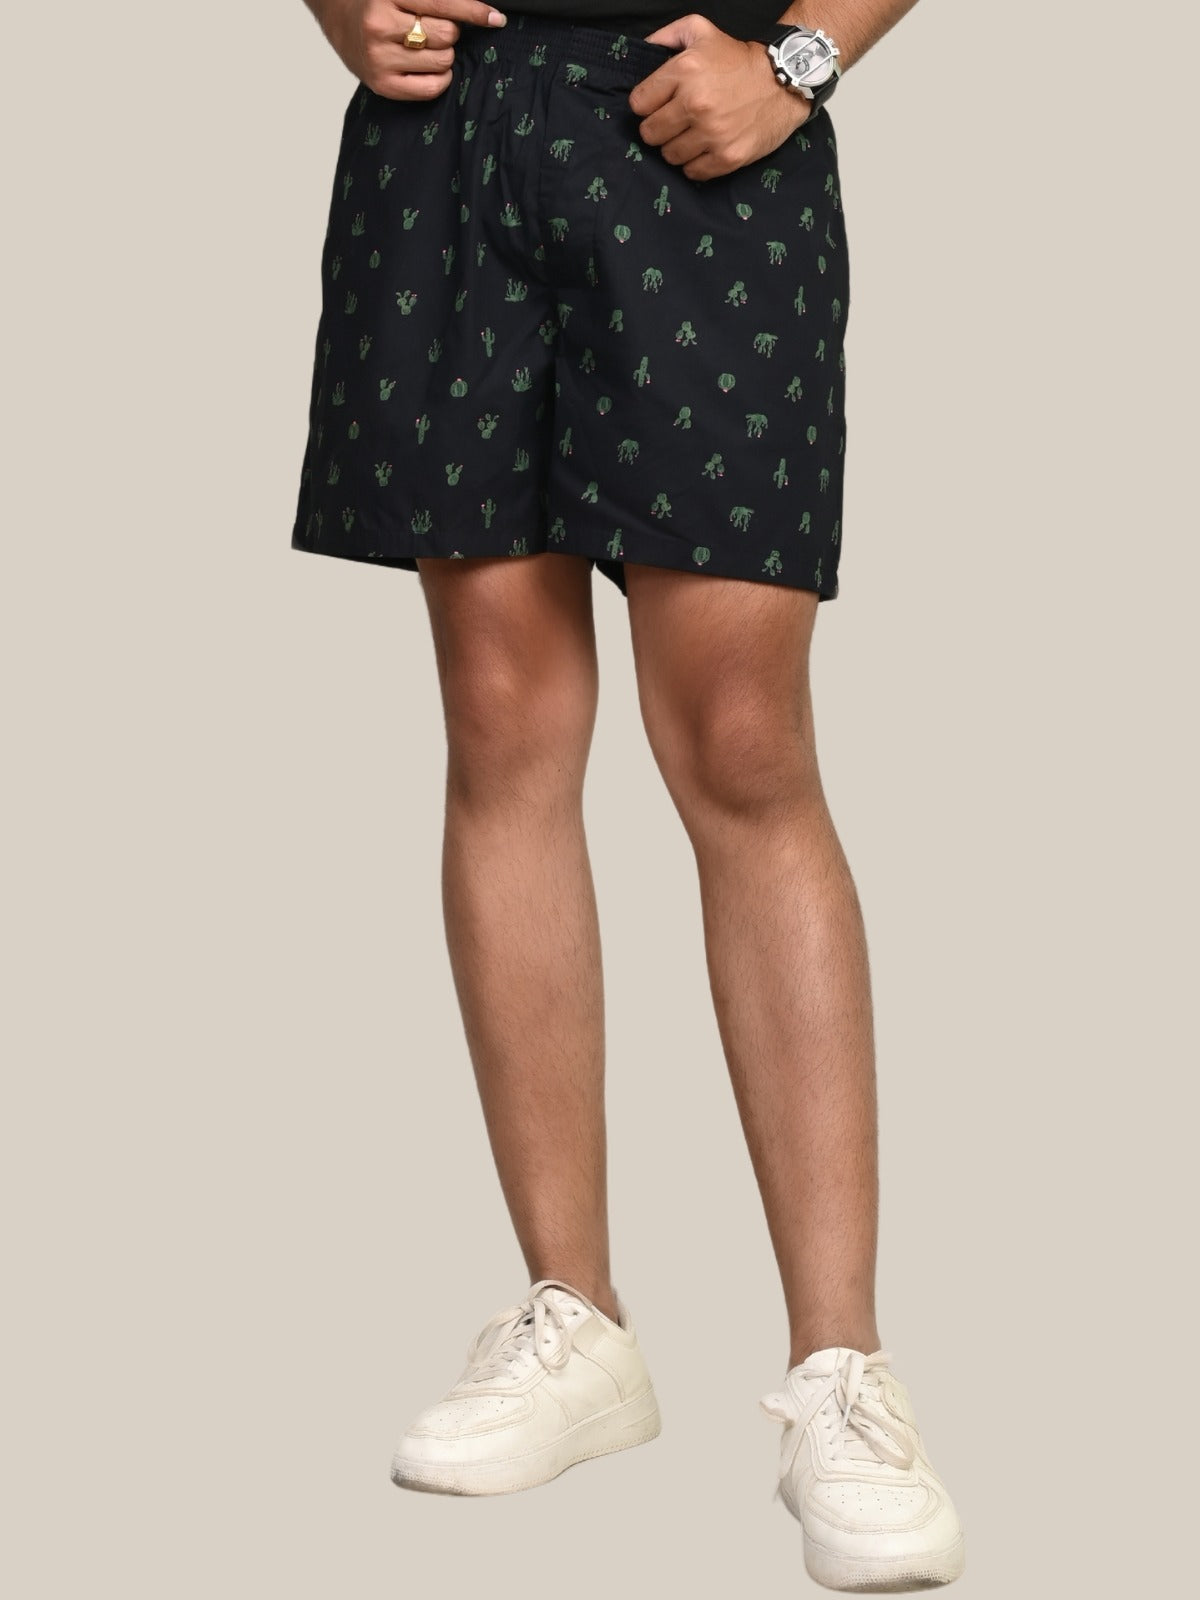 Pack Of 2 Black And White Mens Printed Shorts Combo